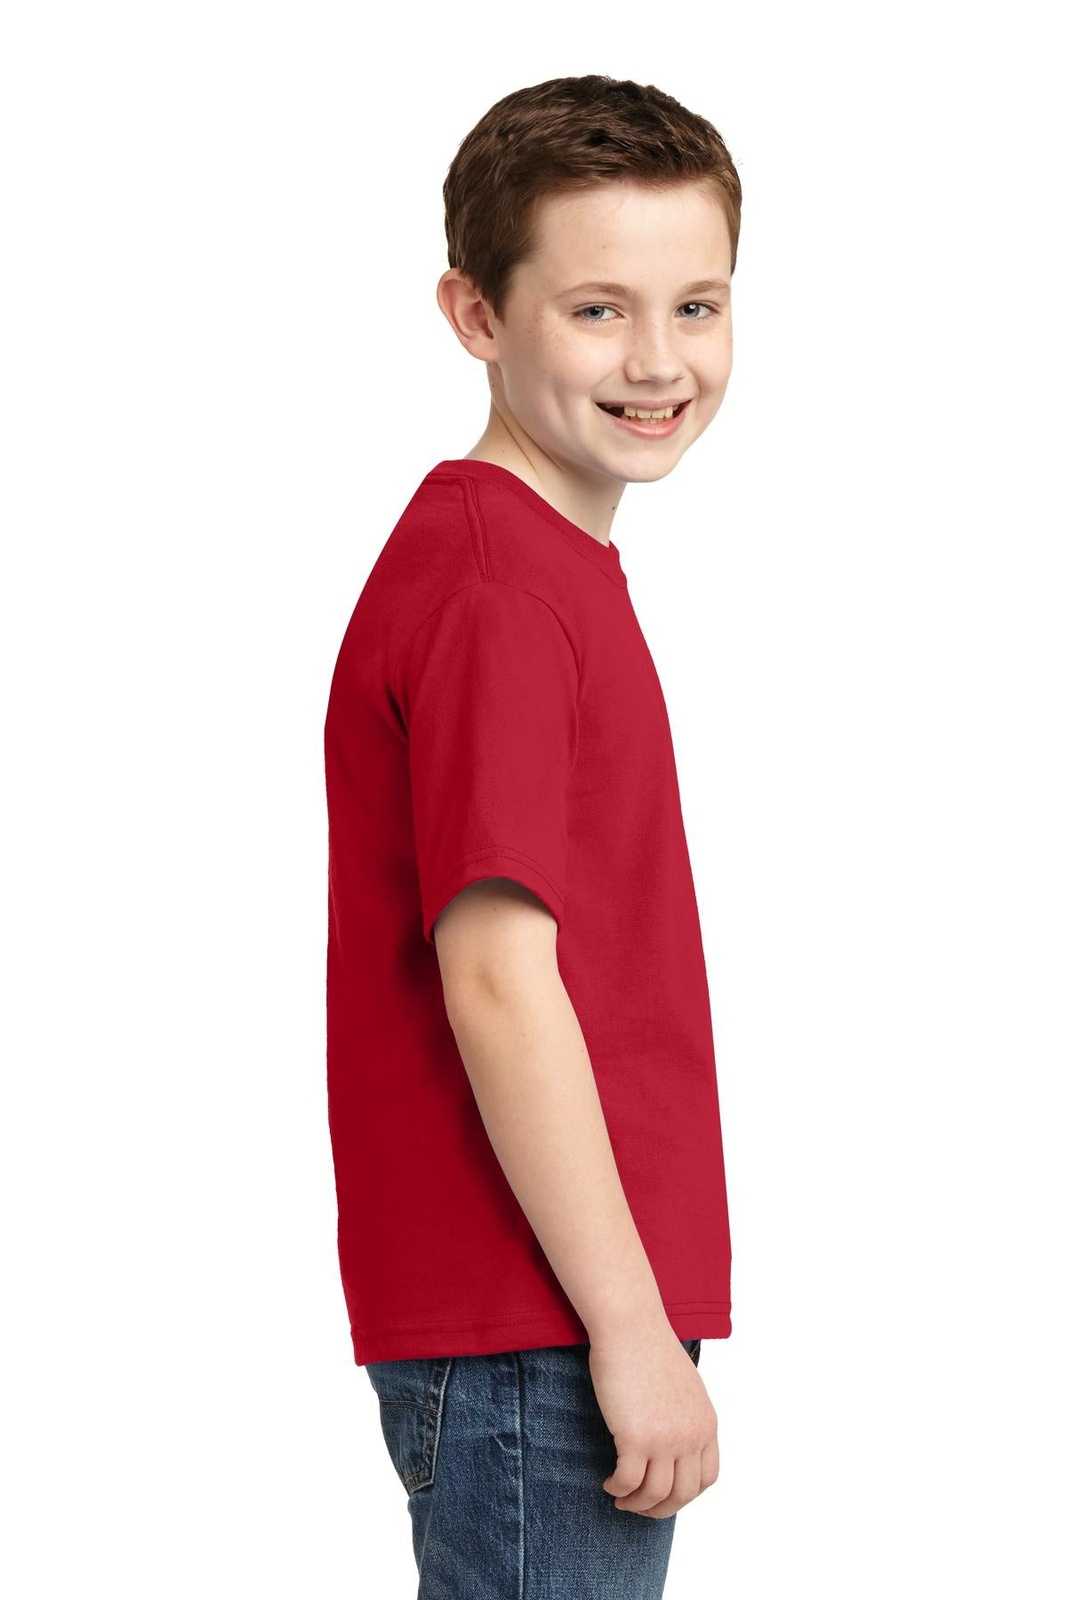 Jerzees 29B Youth Dri-Power 50/50 Cotton/Poly T-Shirt - True Red - HIT a Double